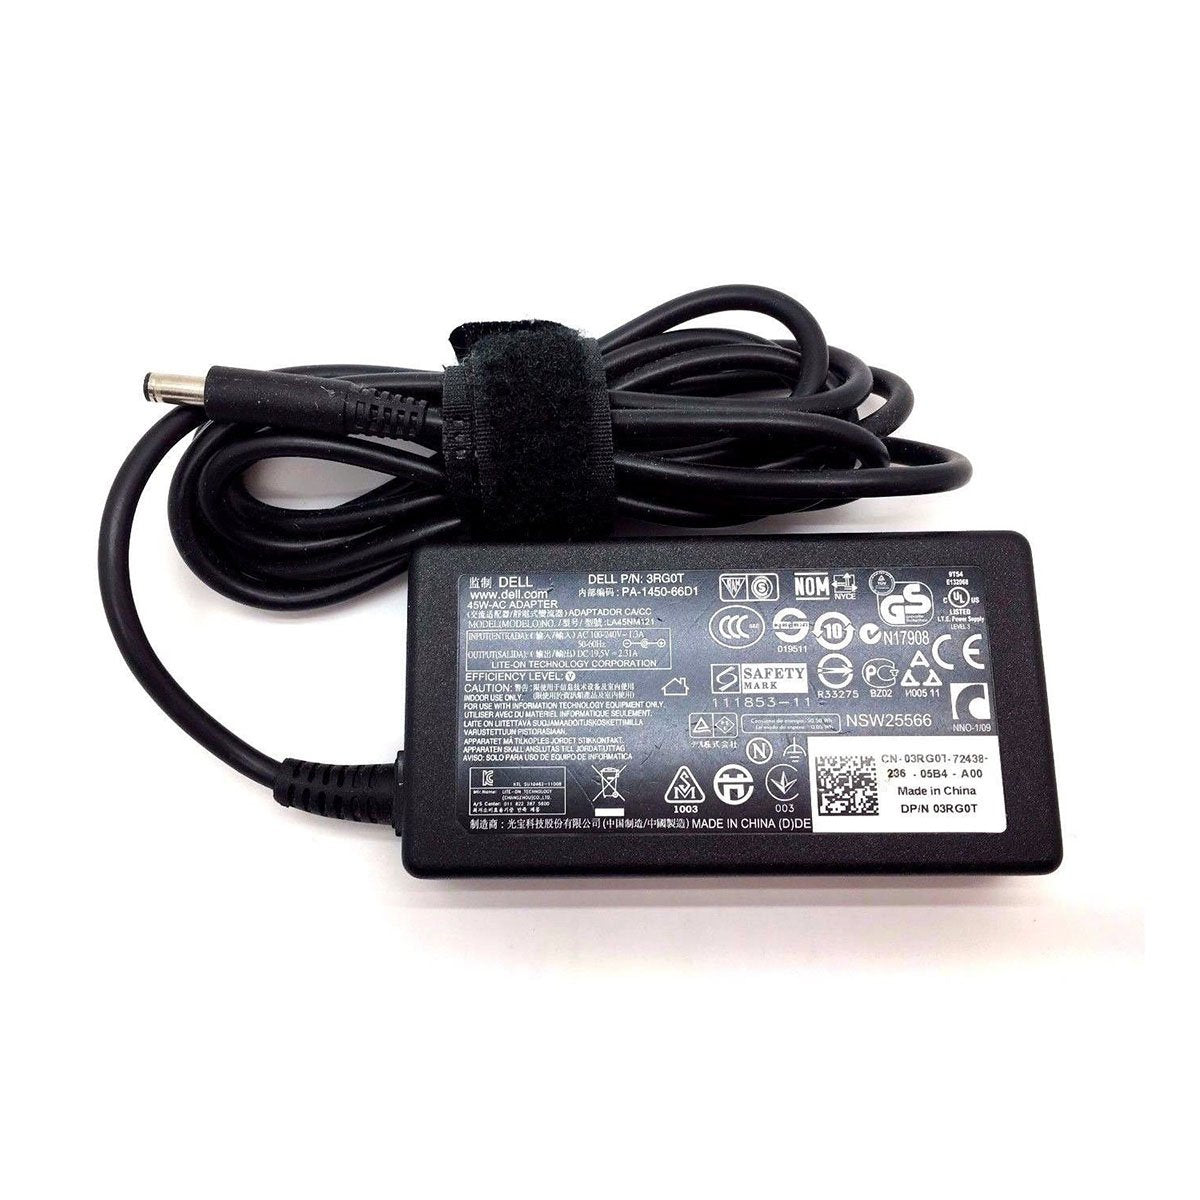 Dell Inspiron 13 5370 Original 45W Laptop Charger Adapter With Power Cord 19.5V 4.5mm Pin